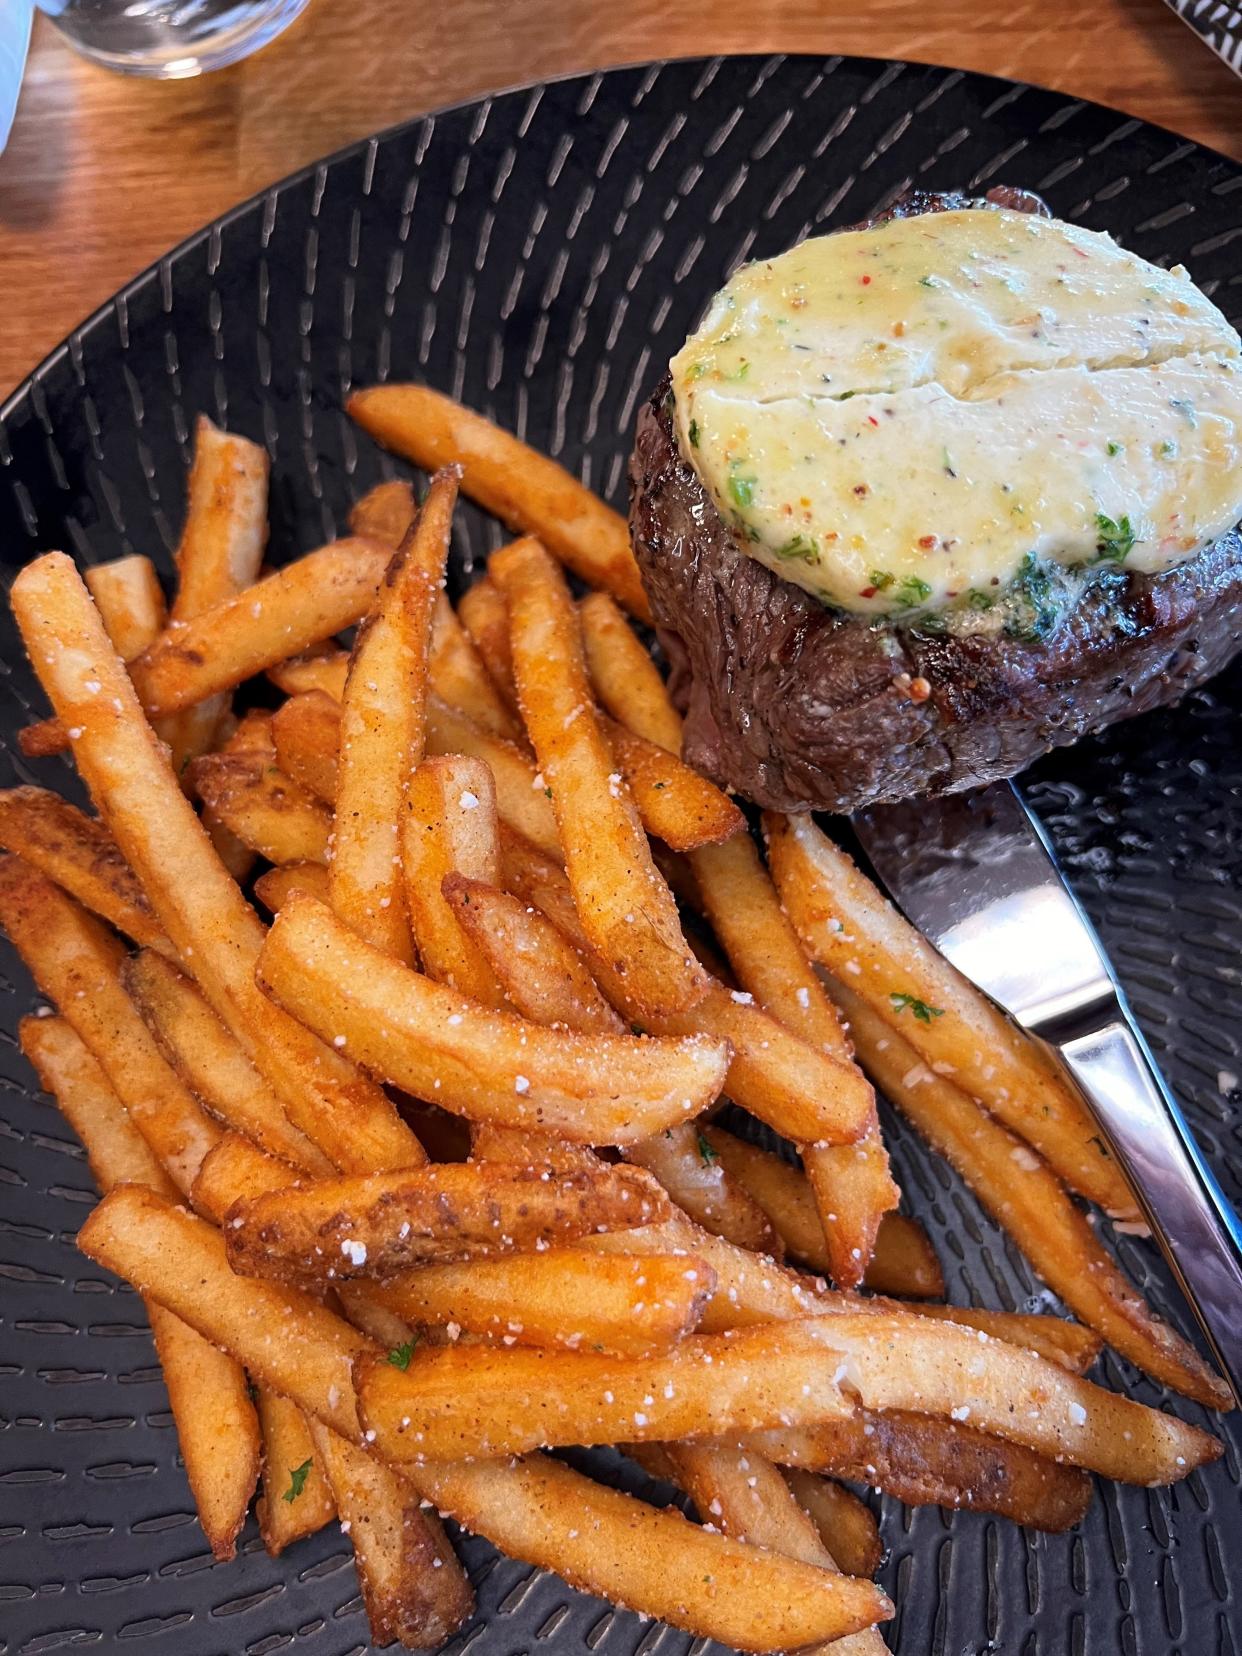 The steak frites at Putts & Pins are surprisingly great.